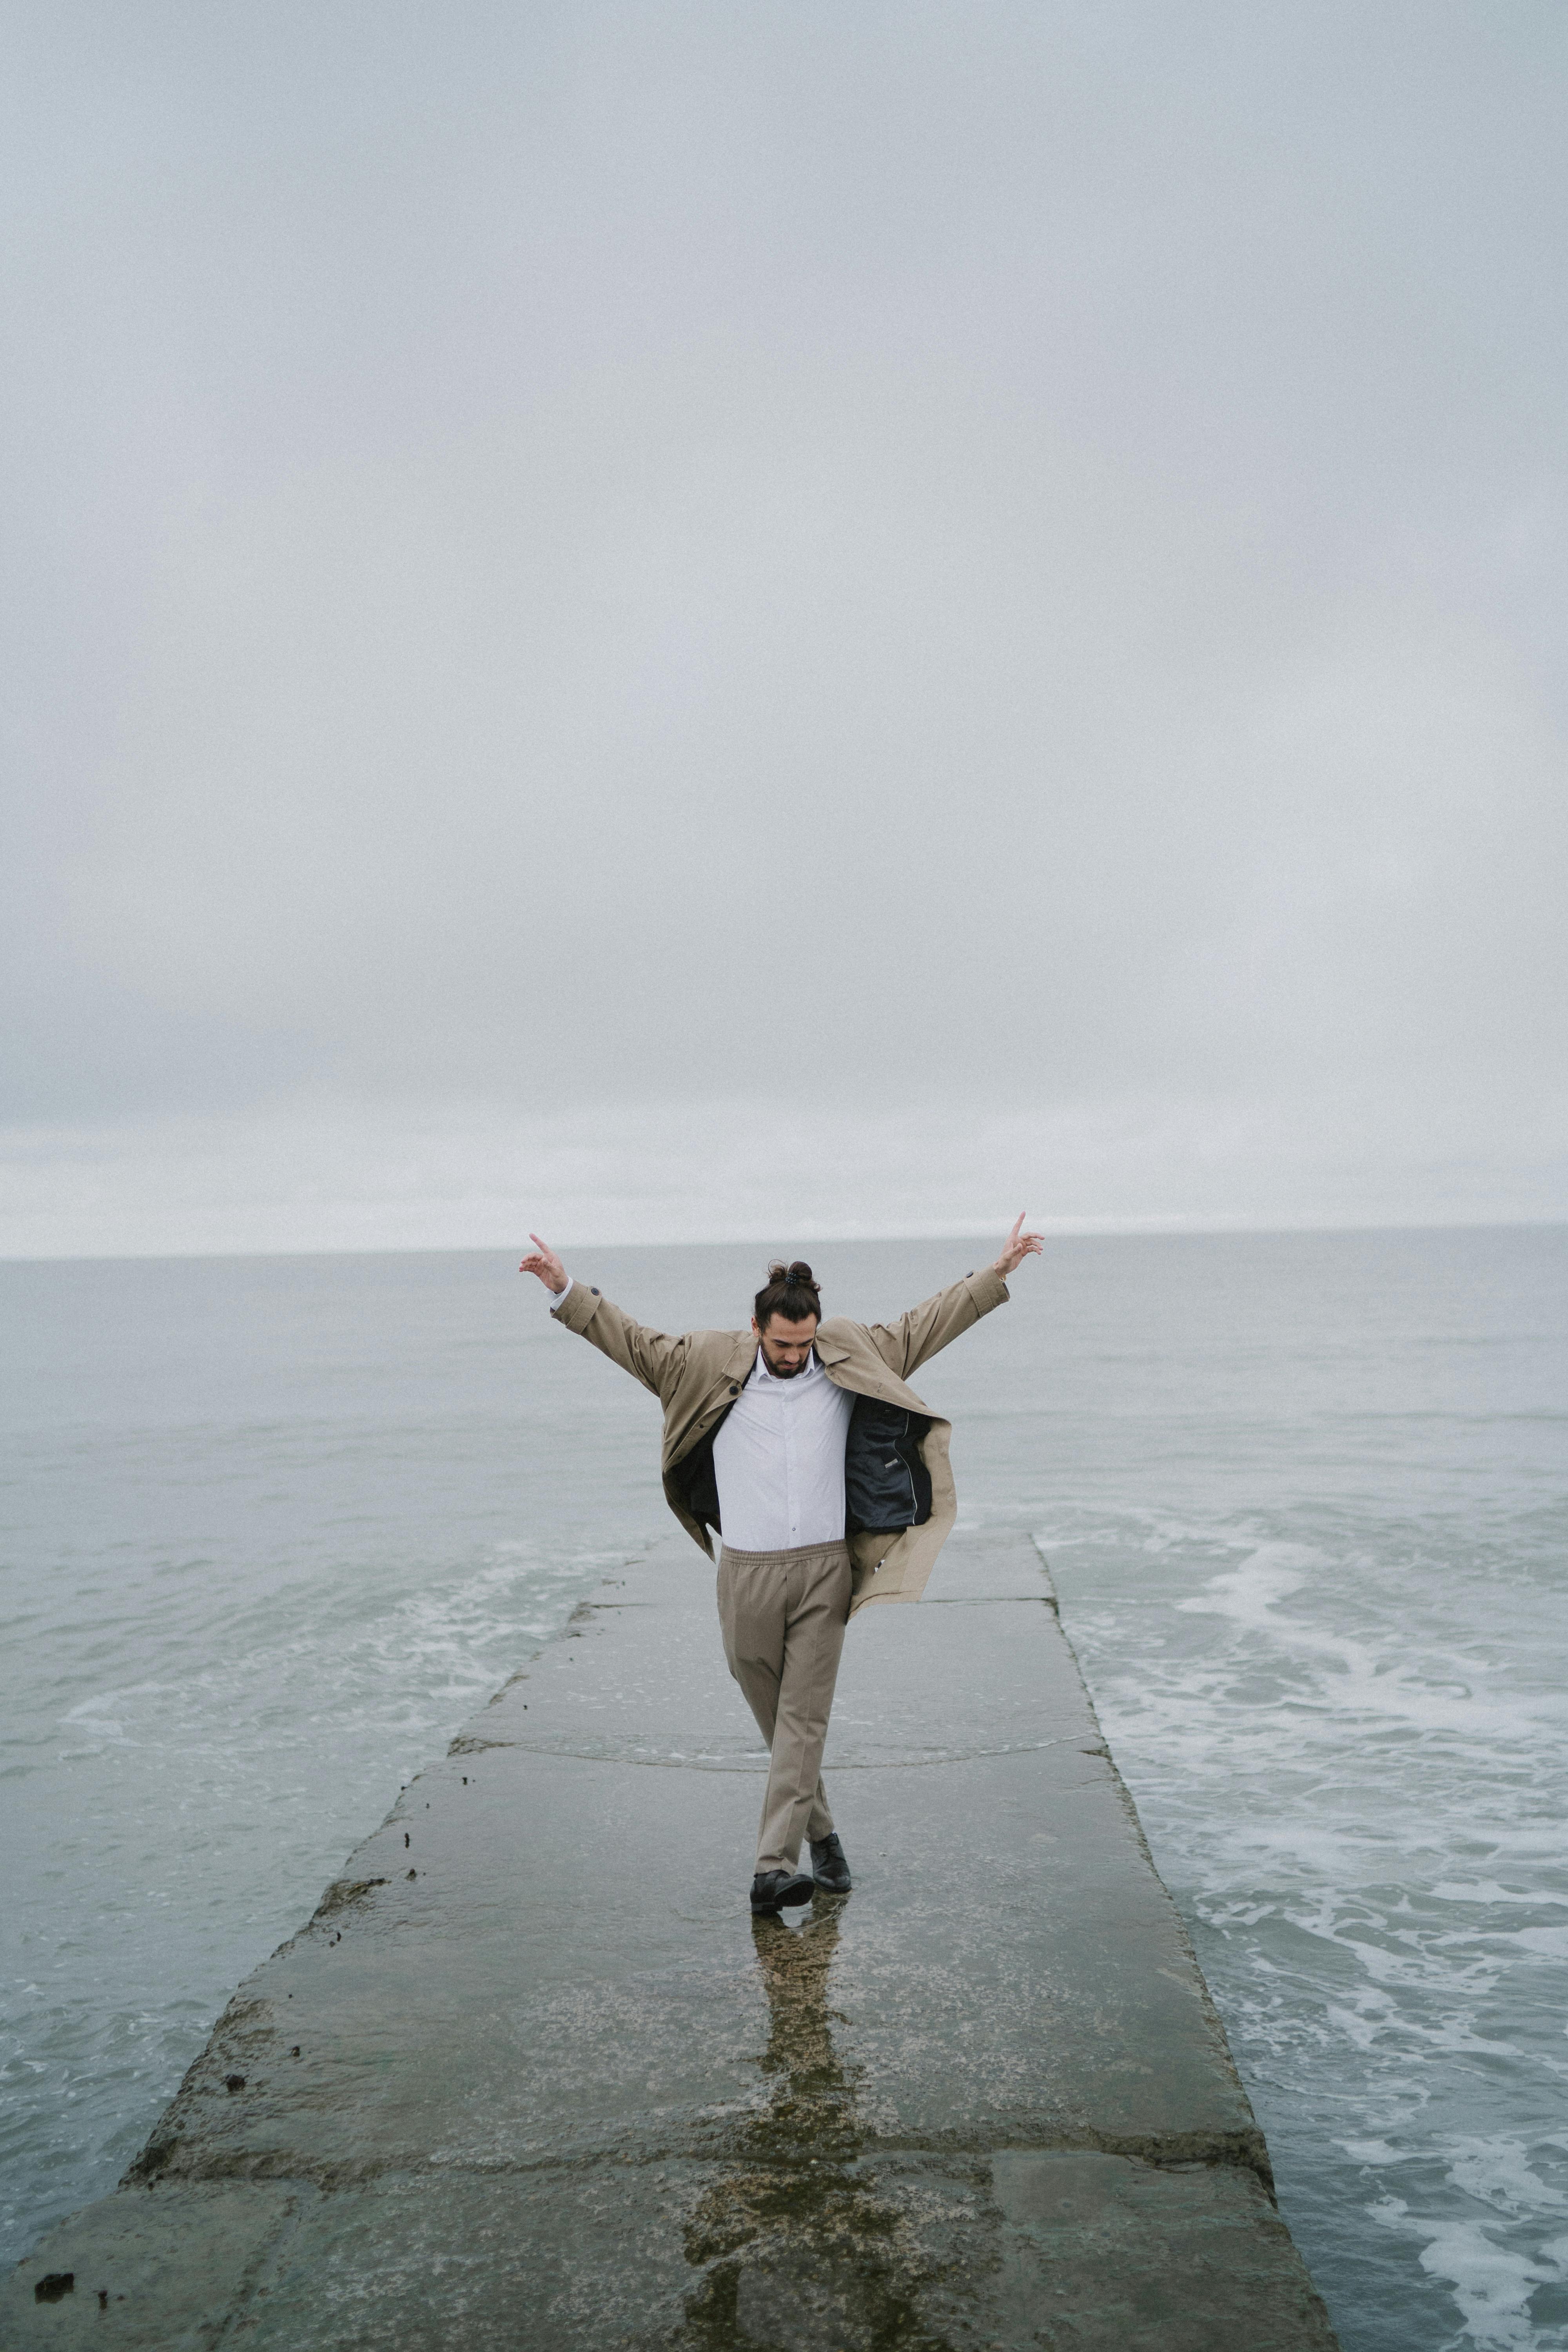 A Man in Beige Jacket Standing on Concrete Dock · Free Stock Photo